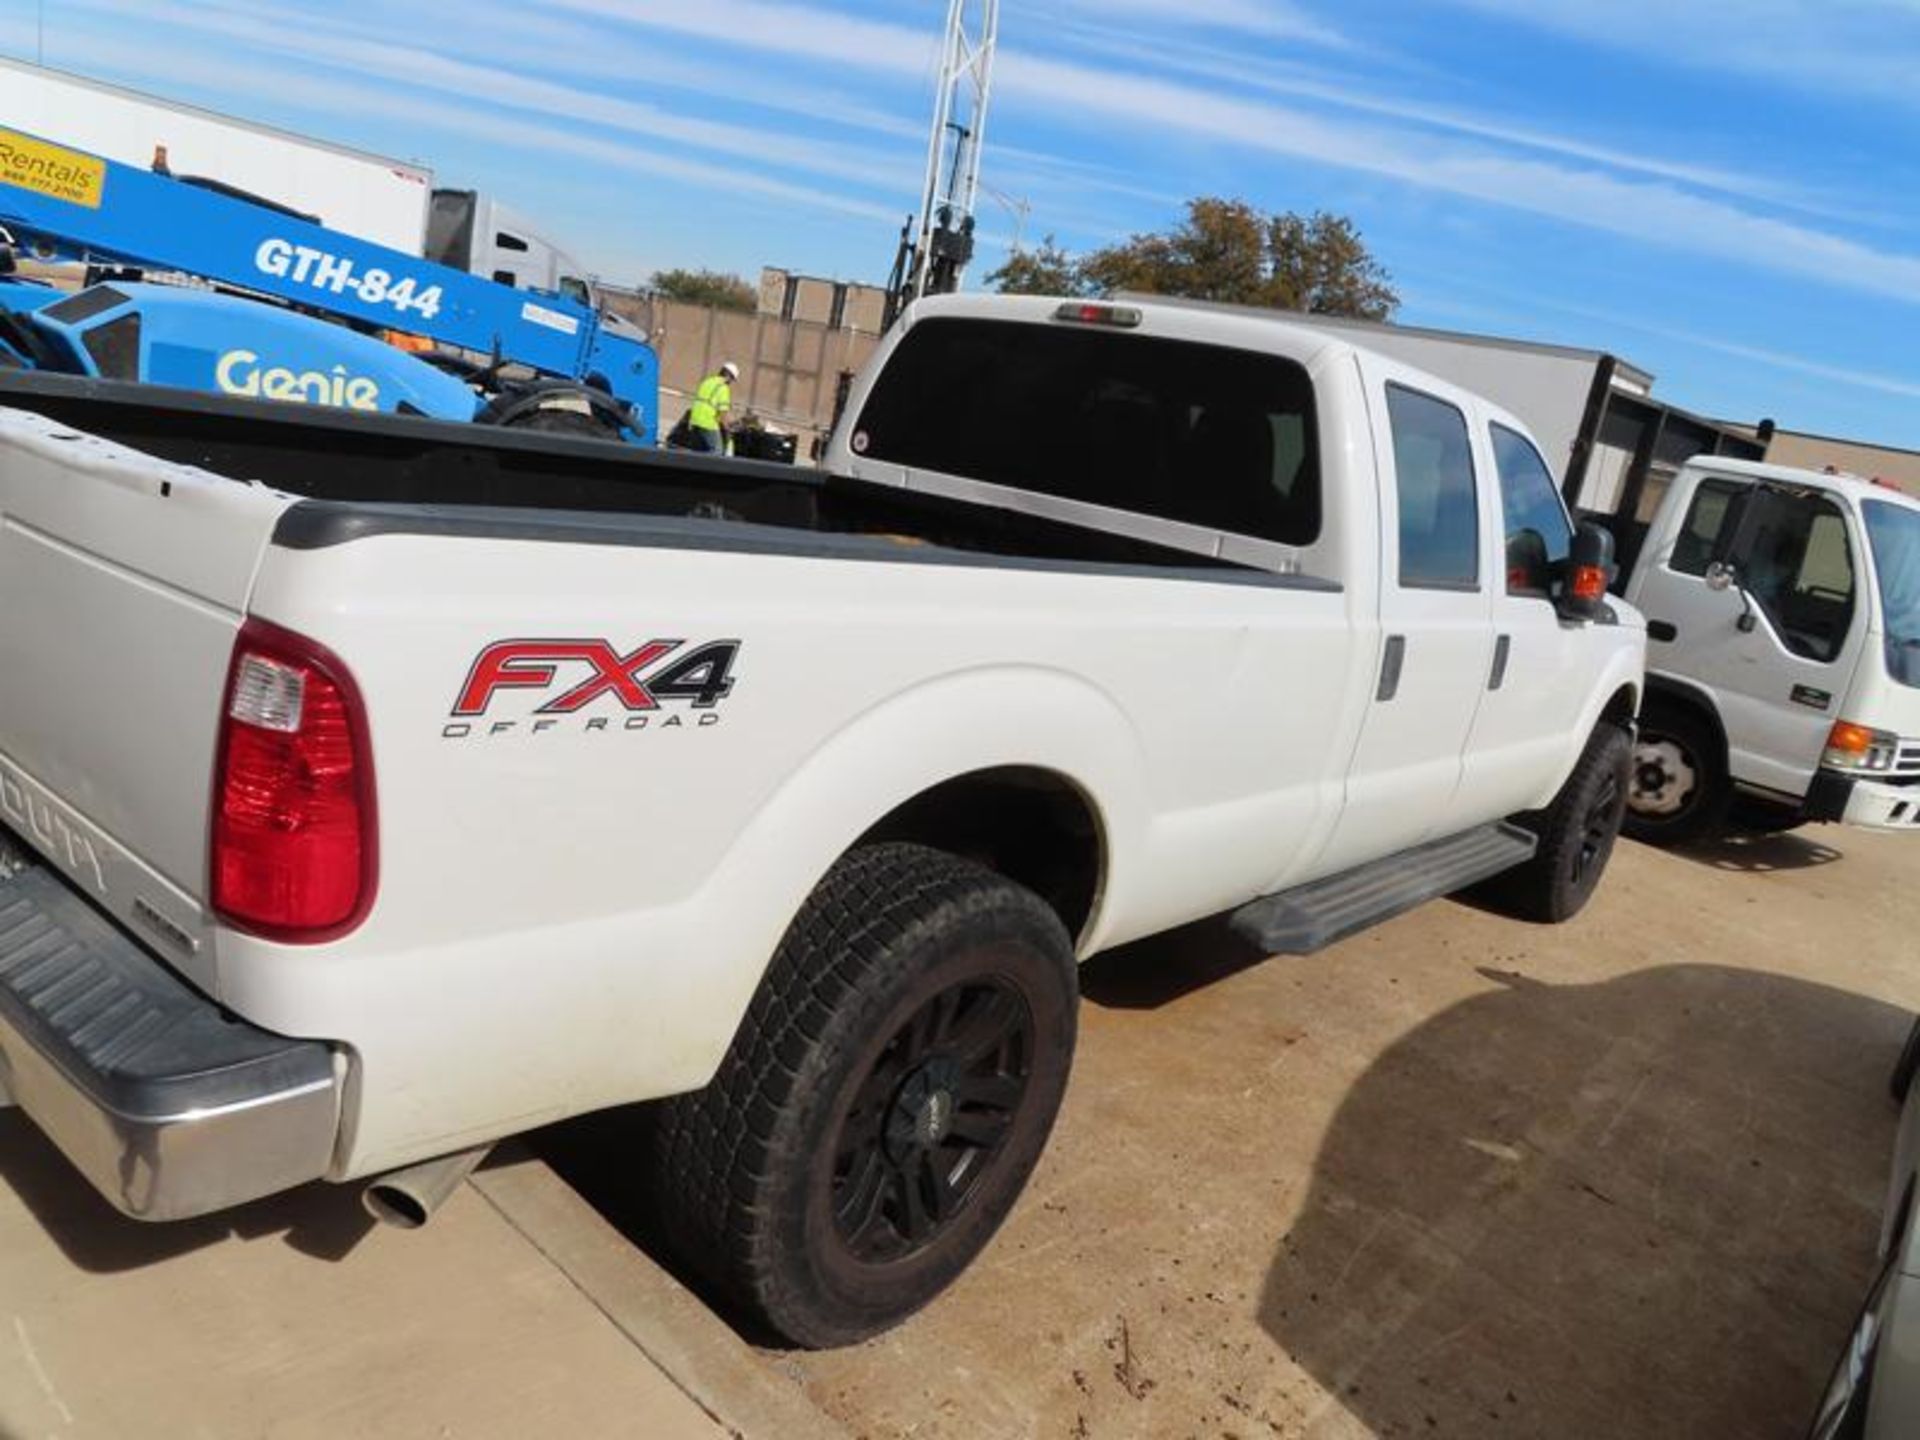 2014 Ford F-250 Xl Super Duty 8' Pickup Truck - Image 9 of 20